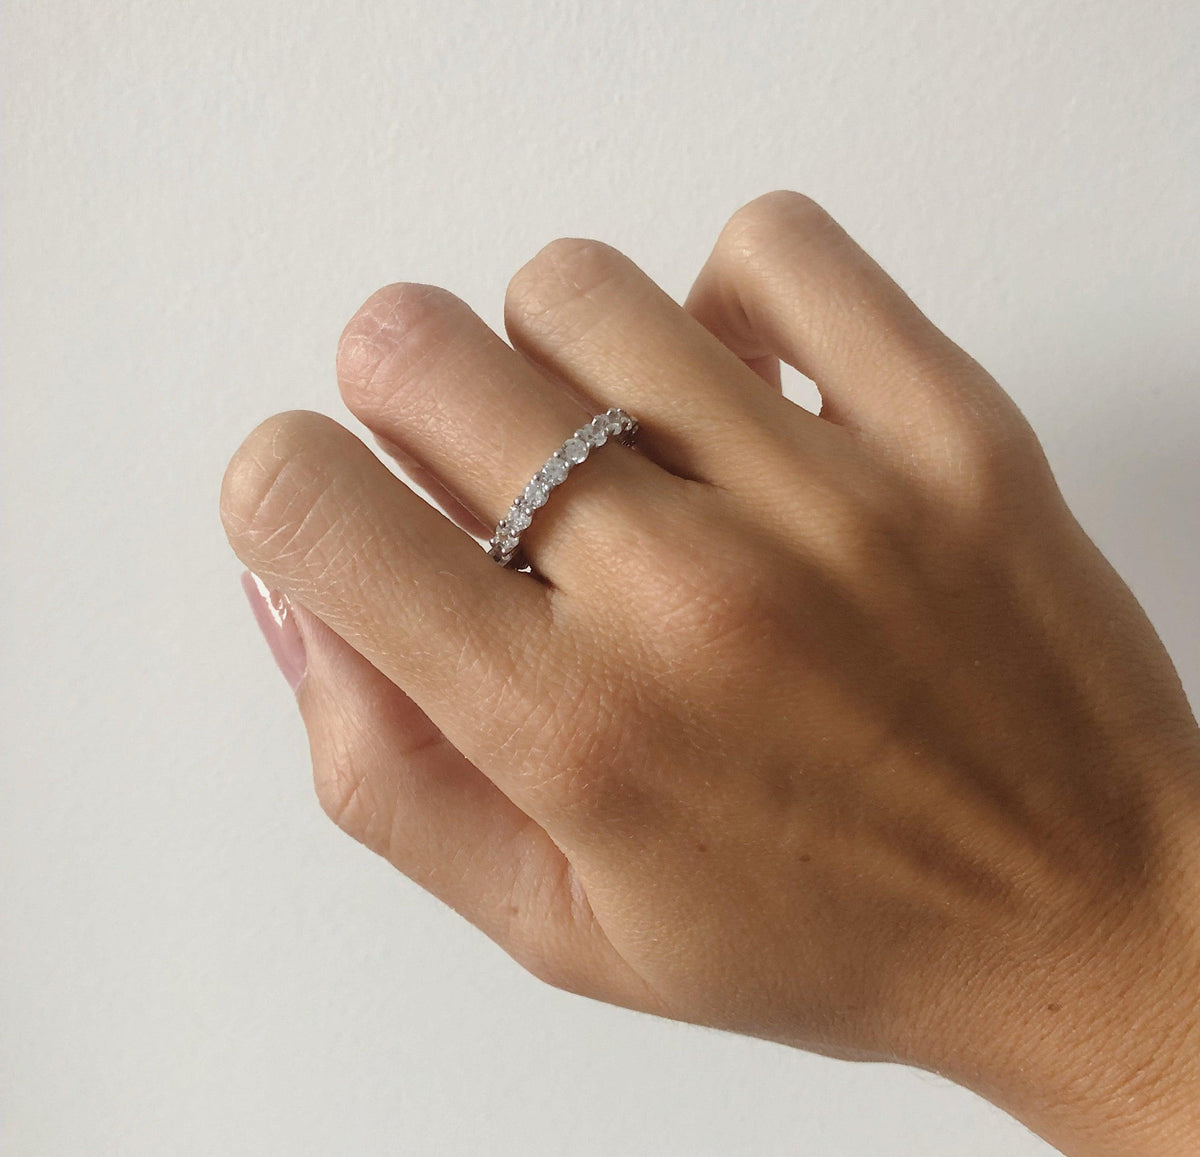 Women's Stackable Silver Ring